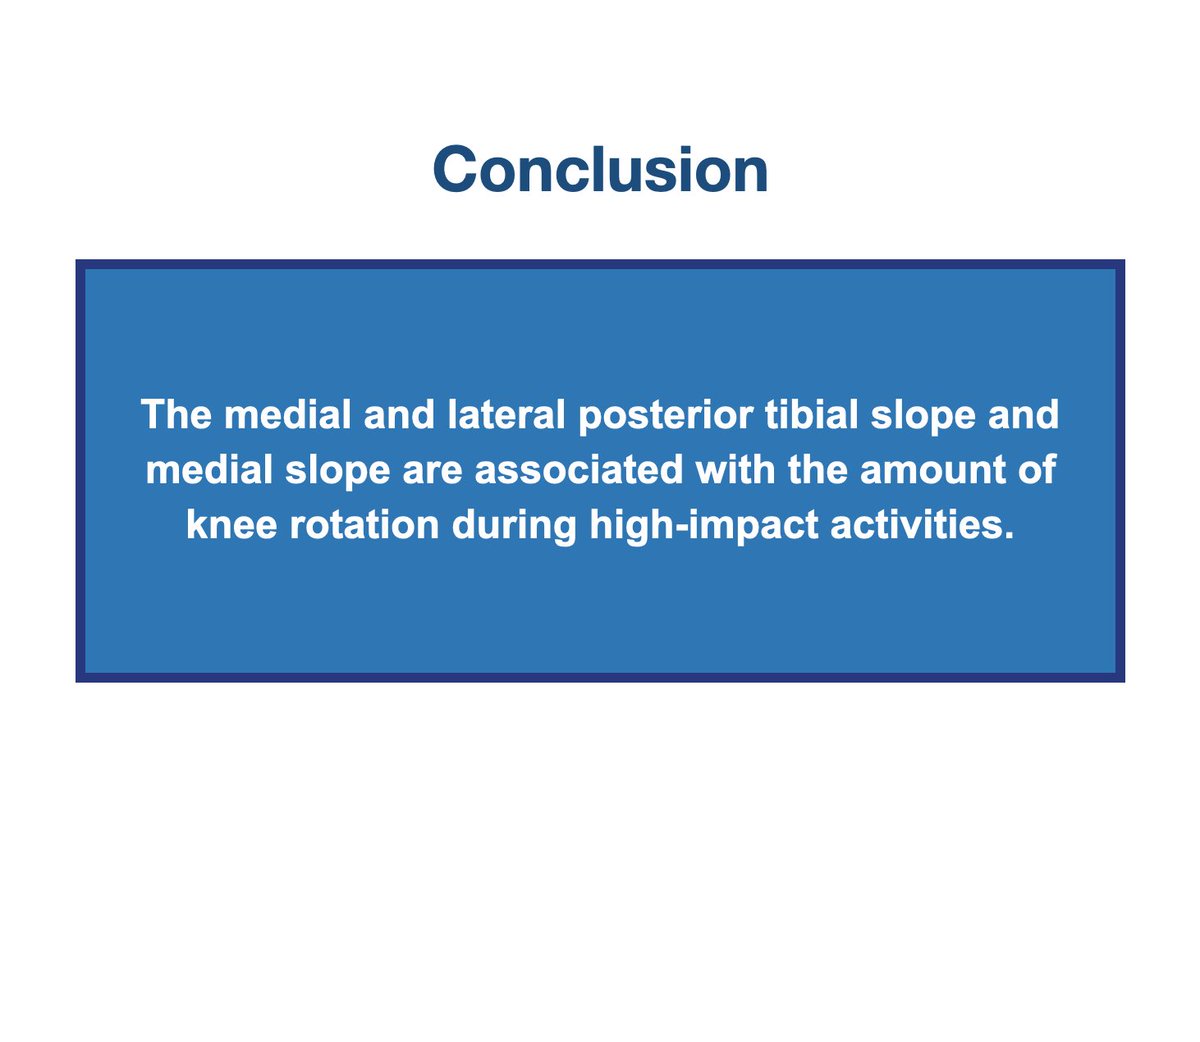 The medial and lateral proximal #tibialslope and medial #meniscus slope are associated with the amount of #kneerotation during #highimpactactivities #biodynamics #sportsmedicine #kneesurgery #bonemorphology @upmcsportsmedicine Link: doi.org/10.1007/s00167… @UPMCSportsMed